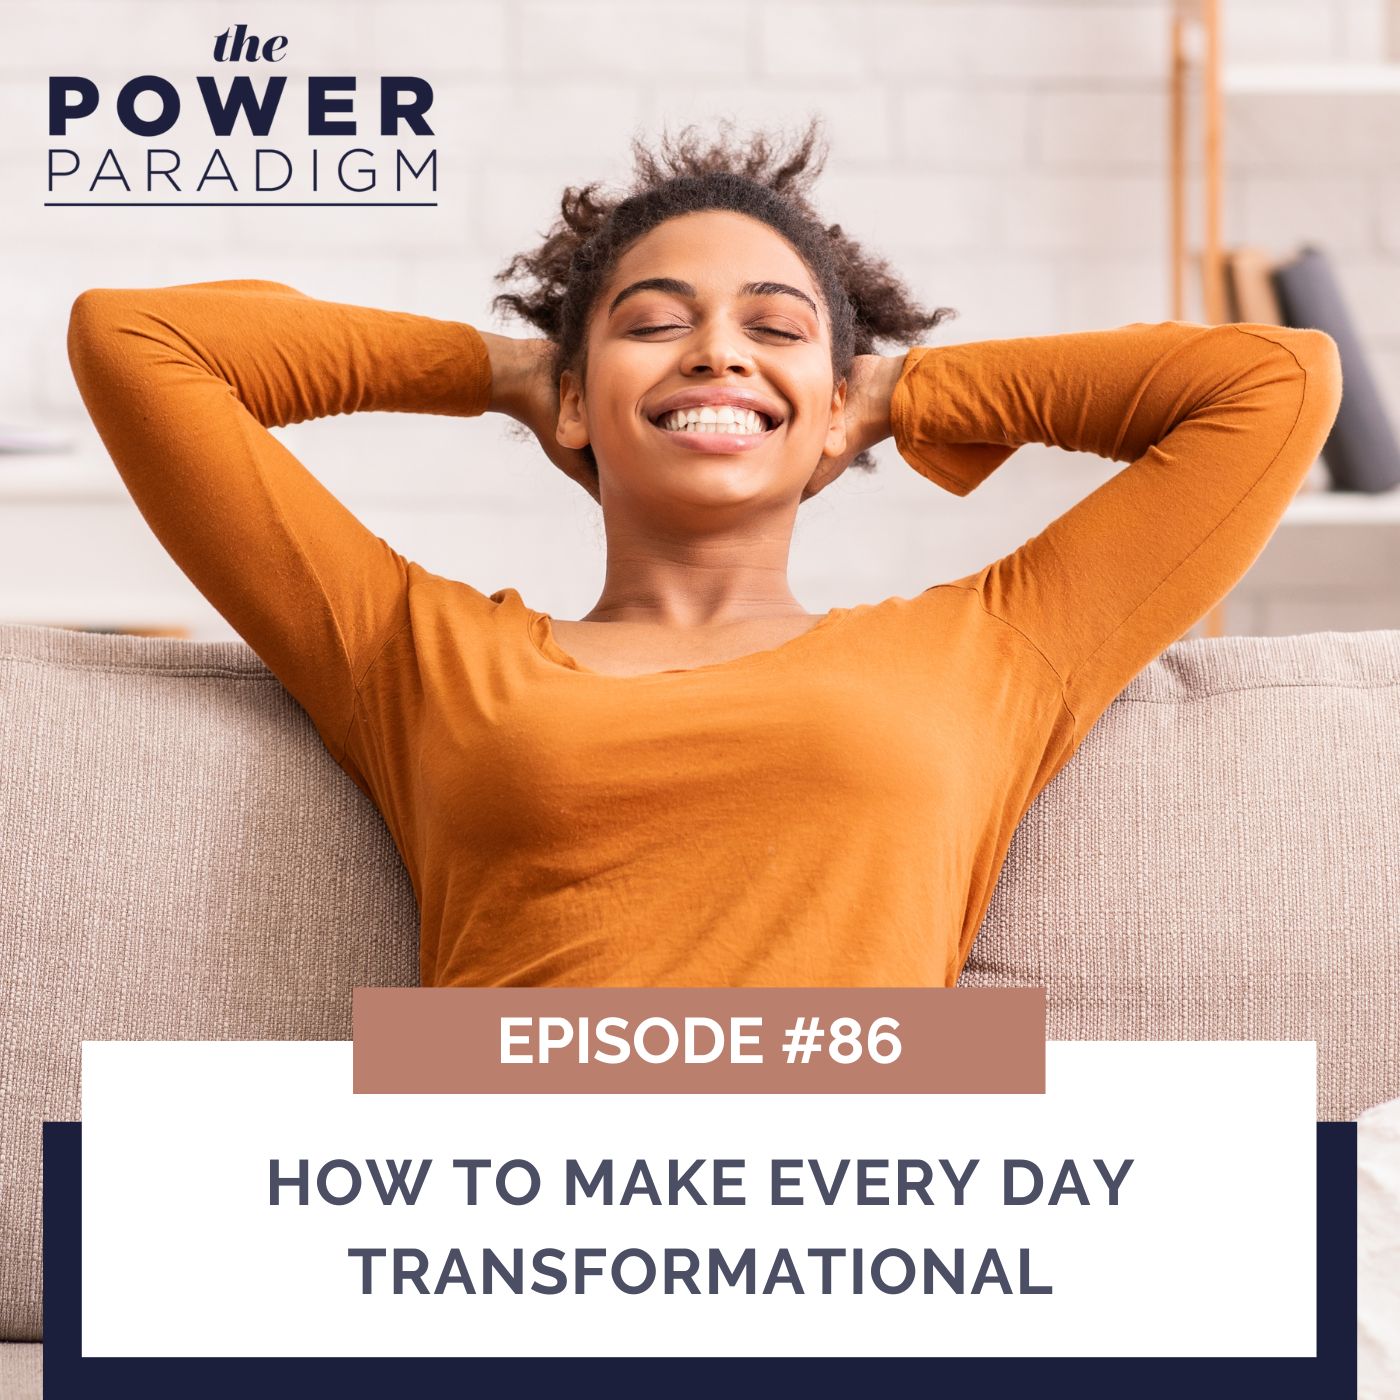 The Power Paradigm™ | How to Make Every Day Transformational